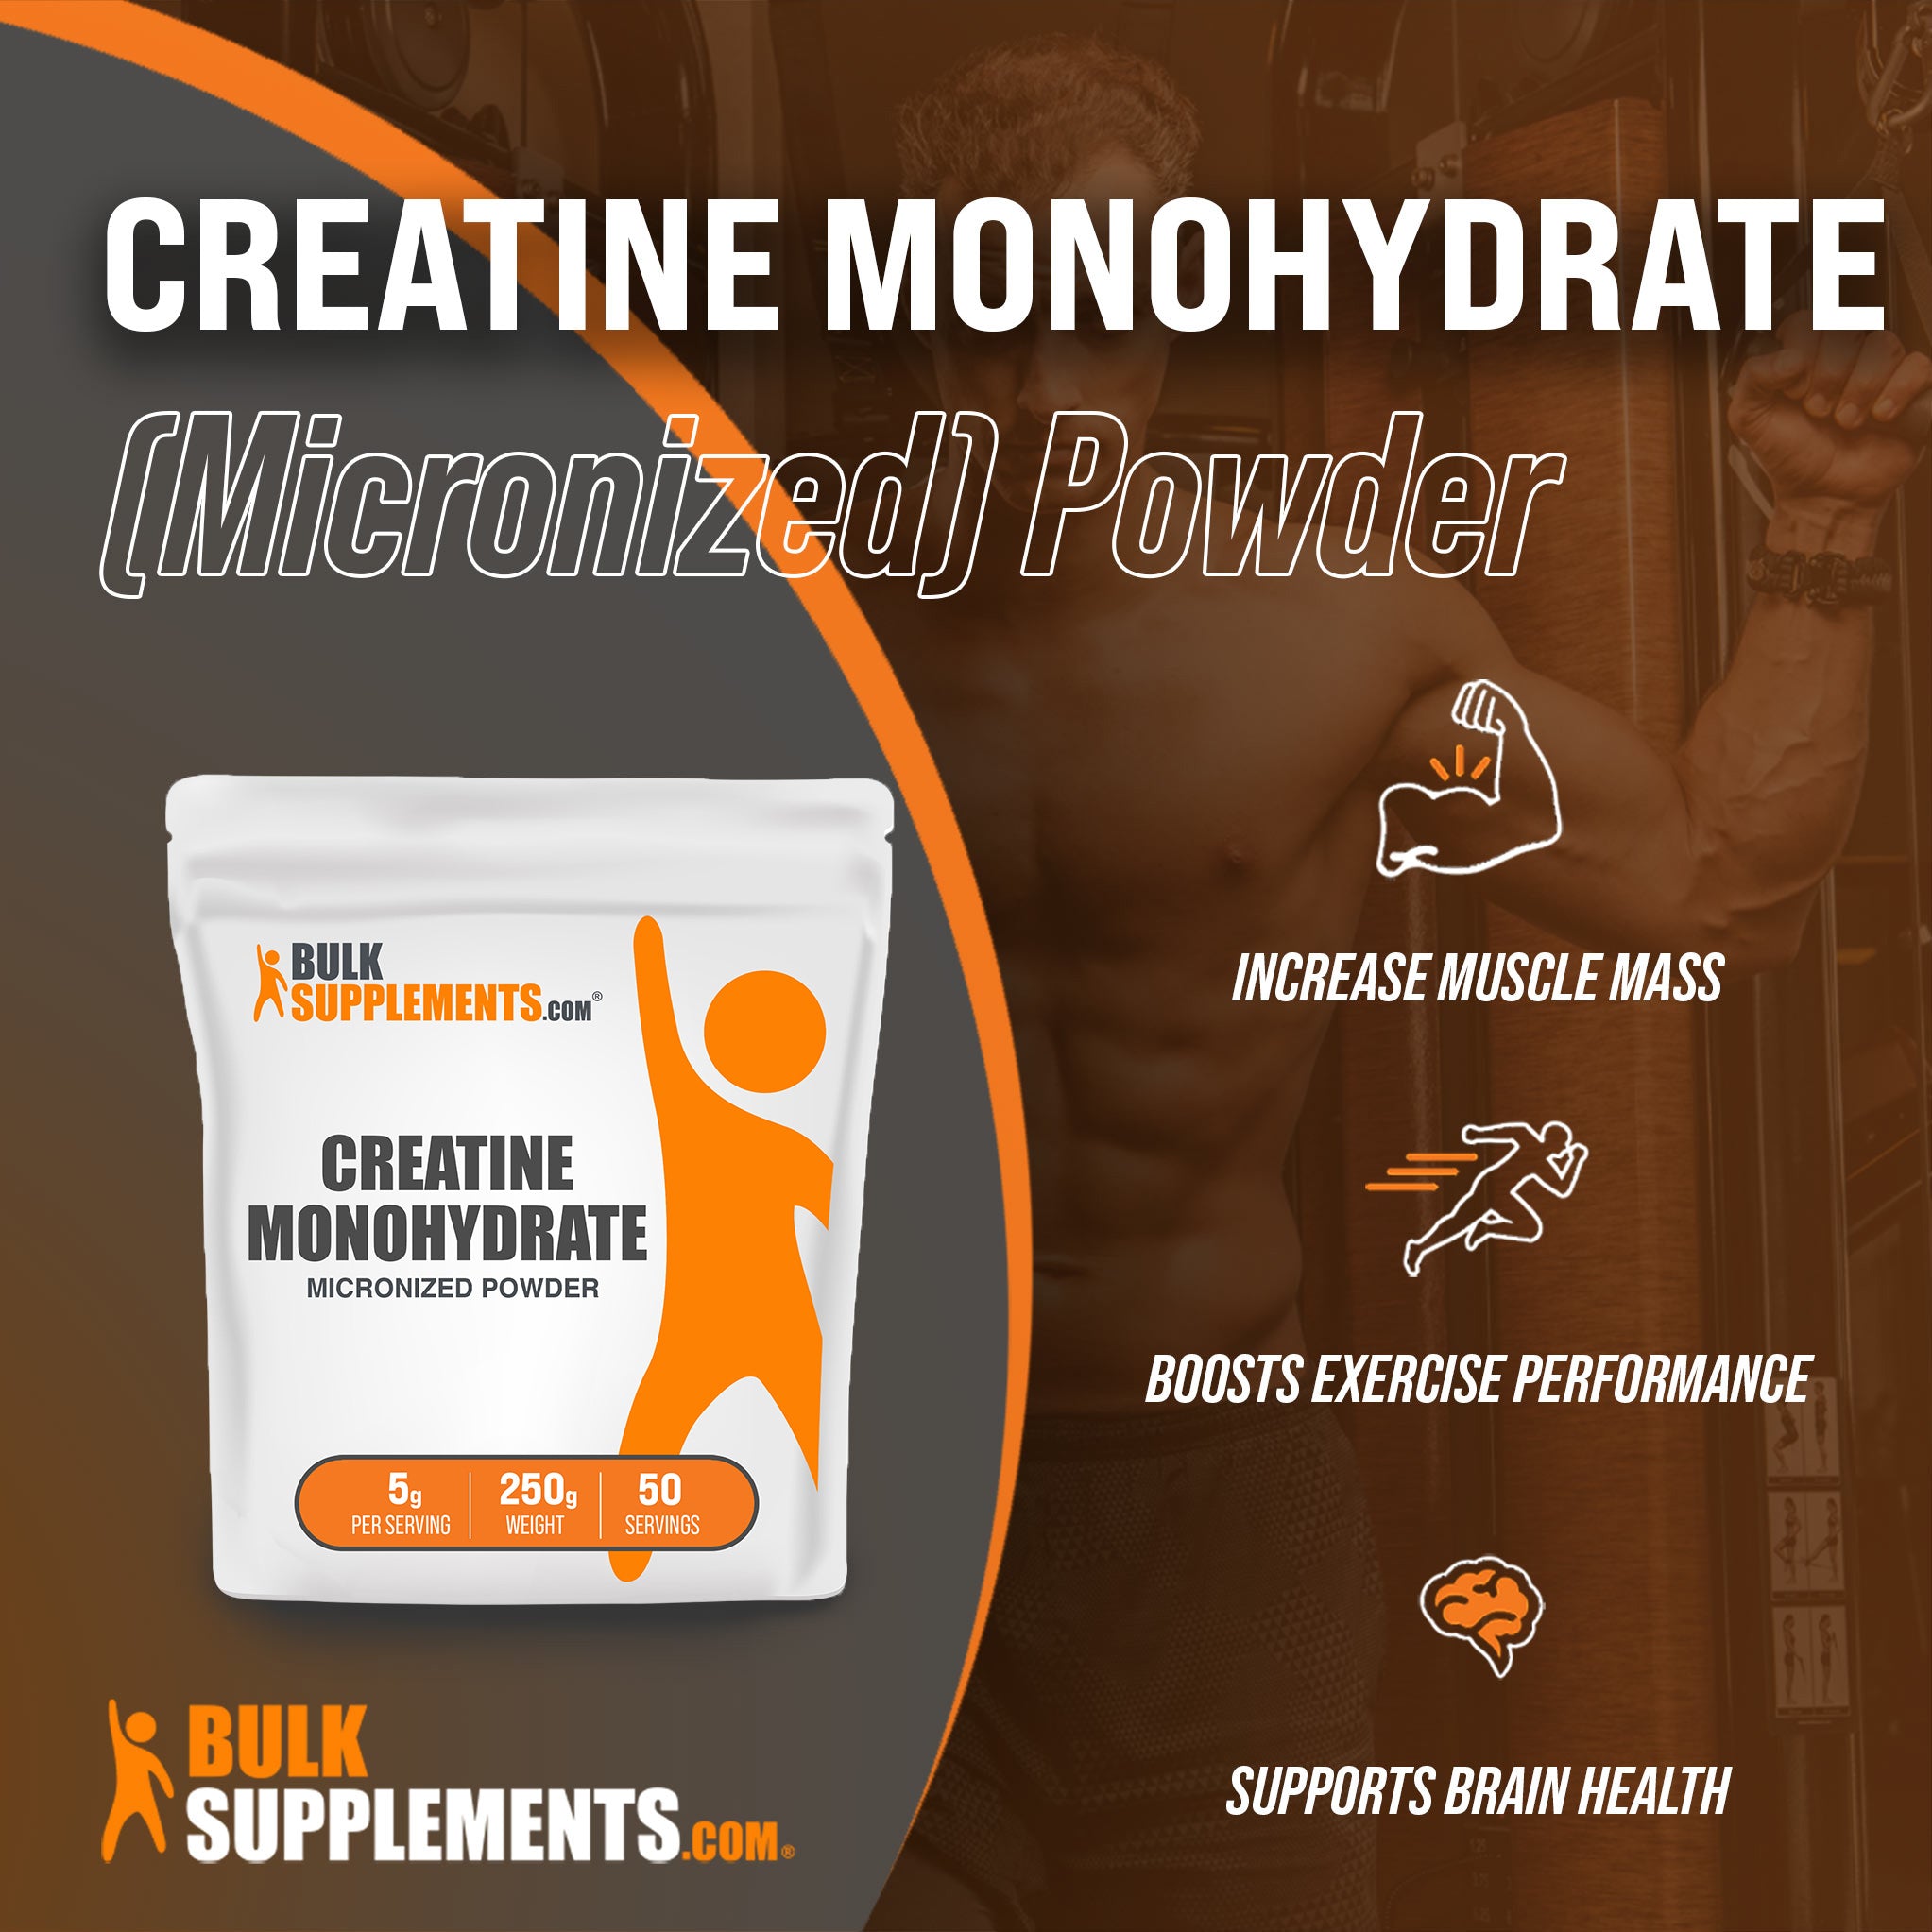 Creatine Monohydrate from Bulk Supplements for Muscle Mass